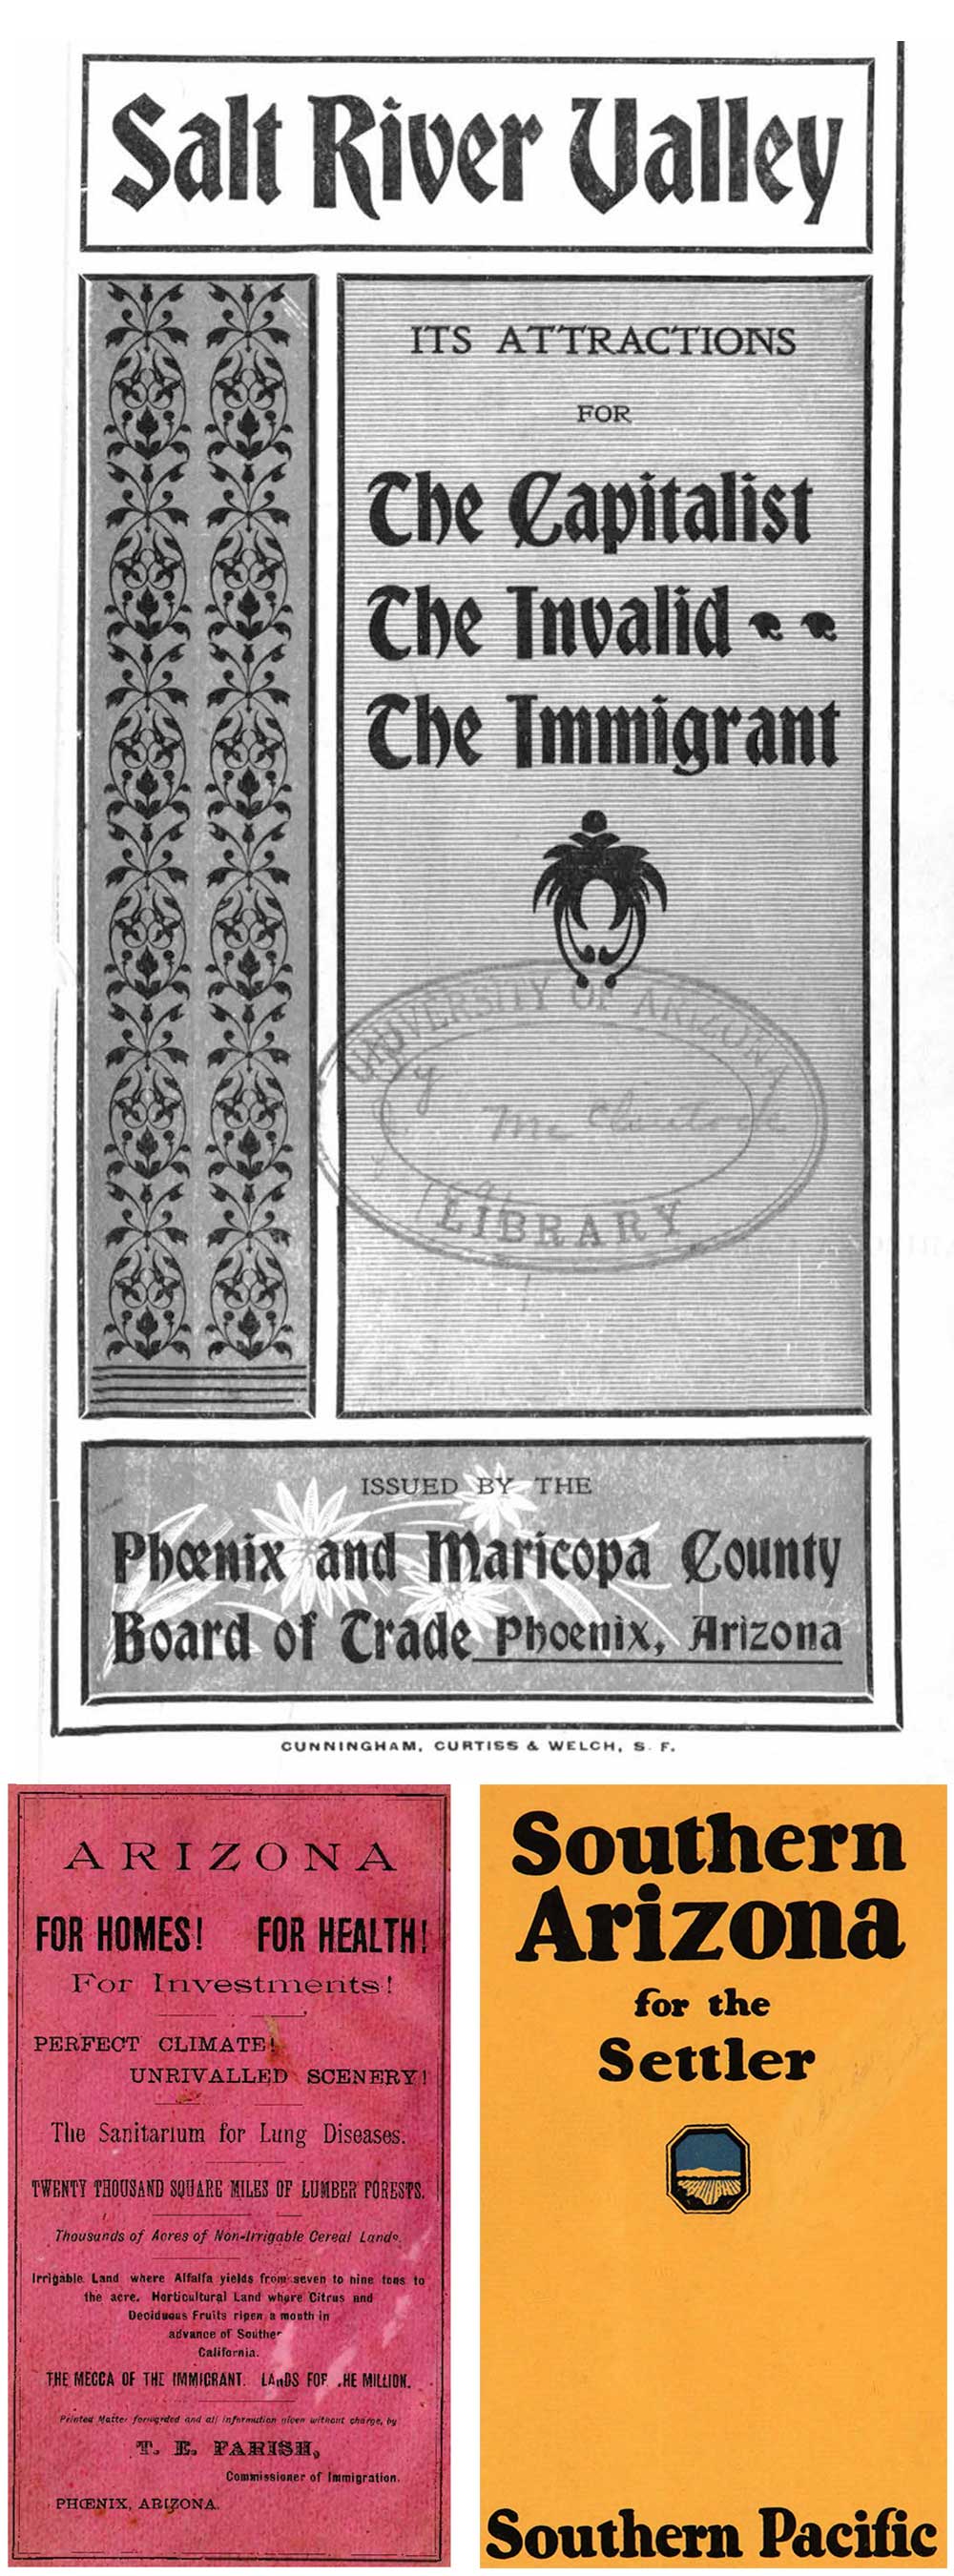 Mix of Arizona settlement brochures issued by the Arizona Commission of Immigration T.E. Farish (1889), the Phoenix and Maricopa County Board of Trade (1800s), and Southern Pacific Railroad (1906).